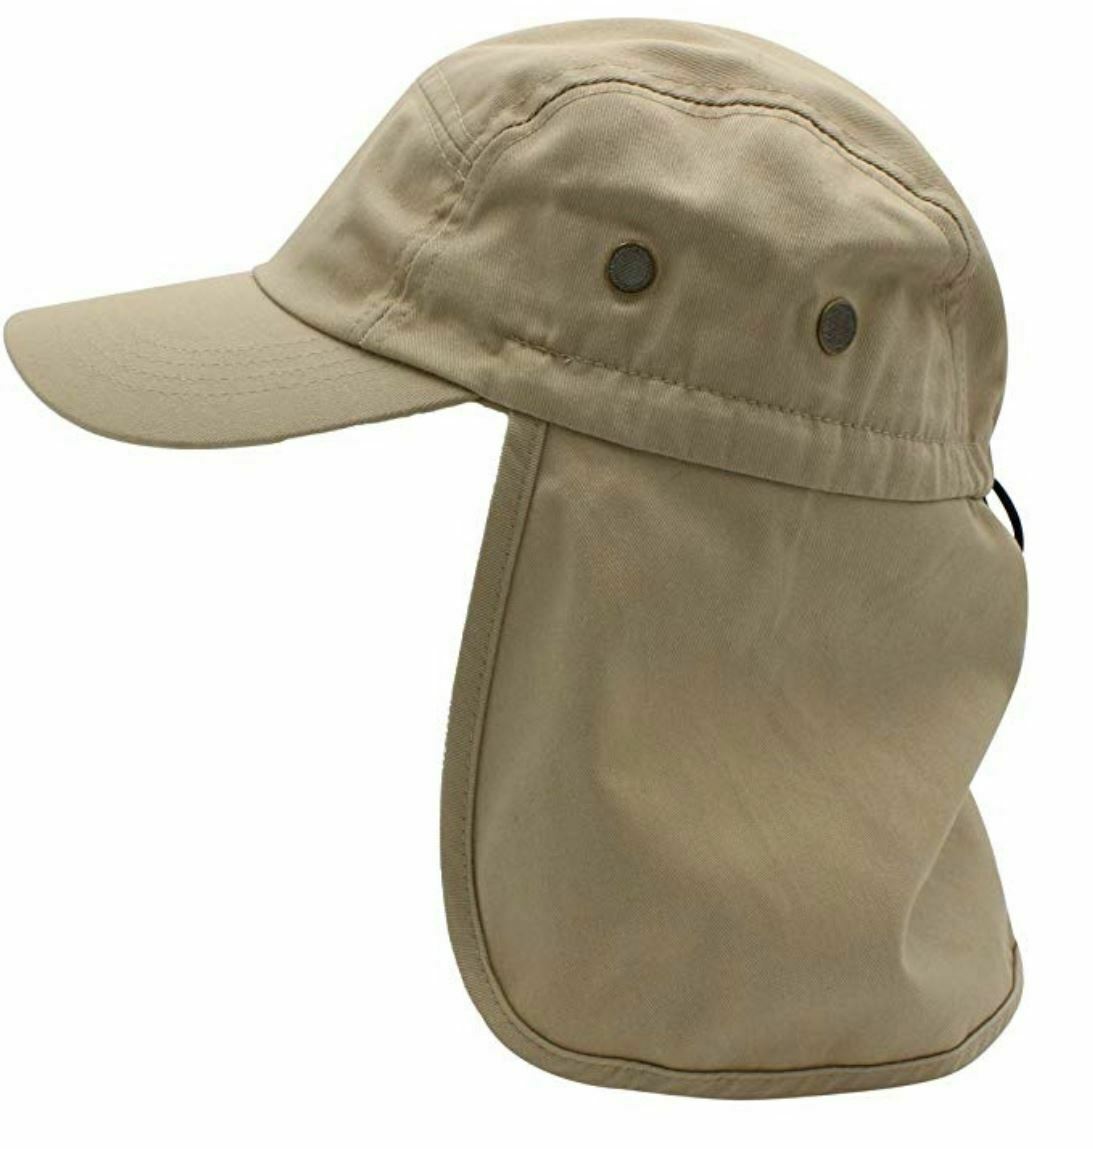 Top Level Fishing Sun Cap UV Protection Ear and Neck Flap Hat